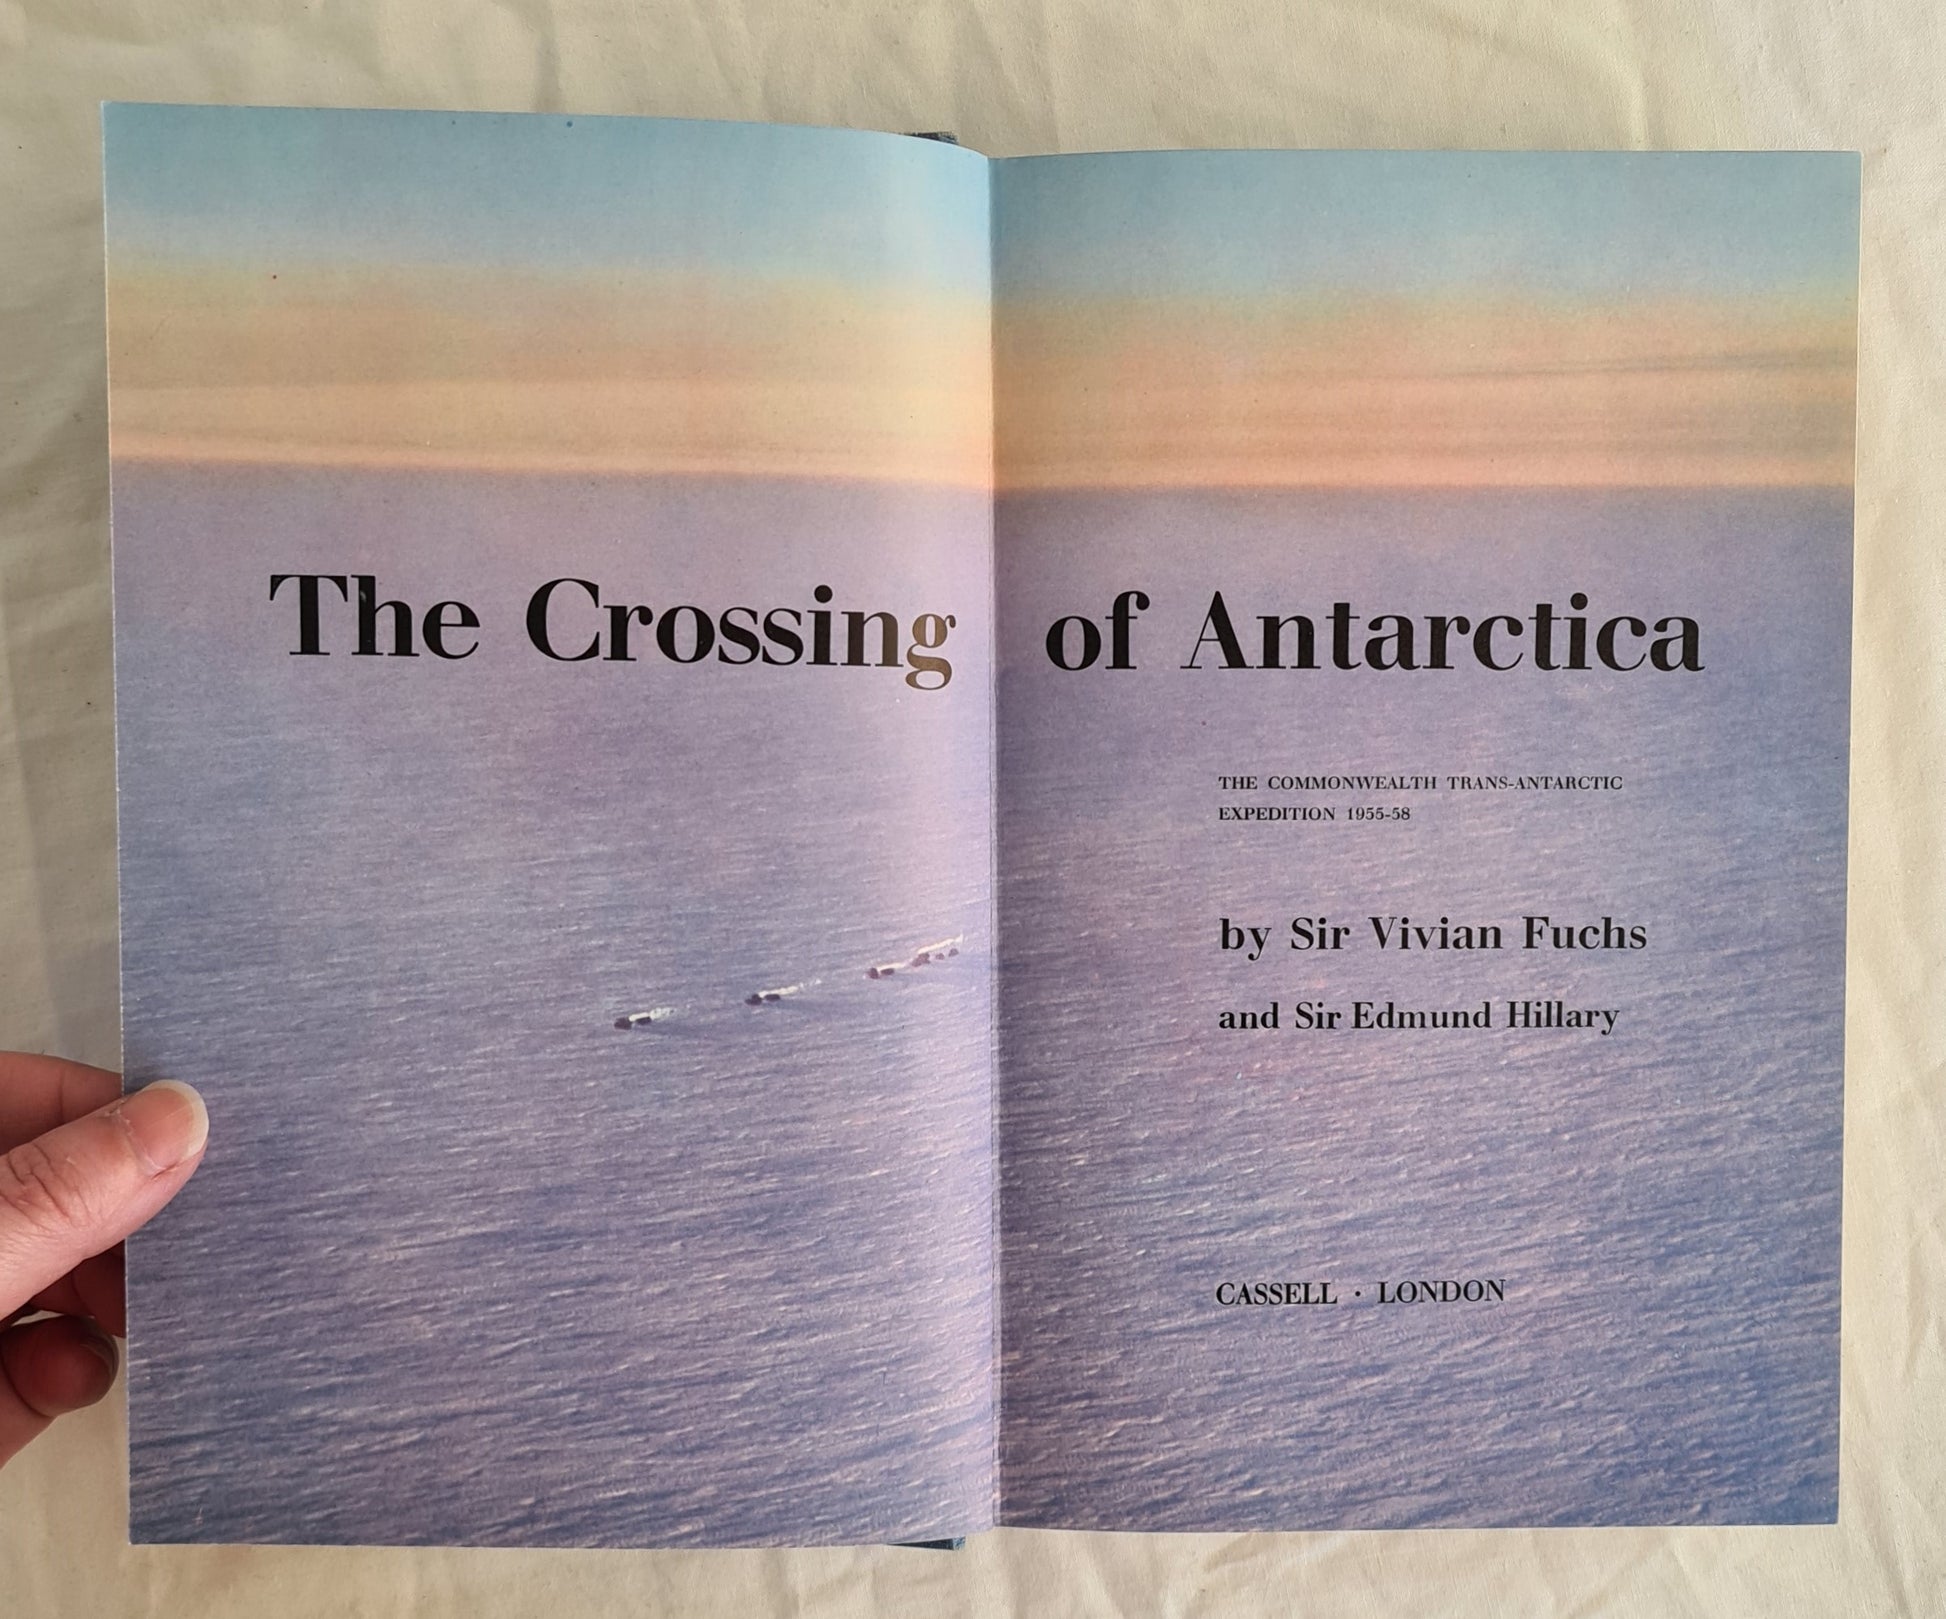 The Crossing of Antarctica The Commonwealth Trans-Antarctic Expedition 1955-58 by Sir Vivian Fuchs and Sir Edmund Hillary